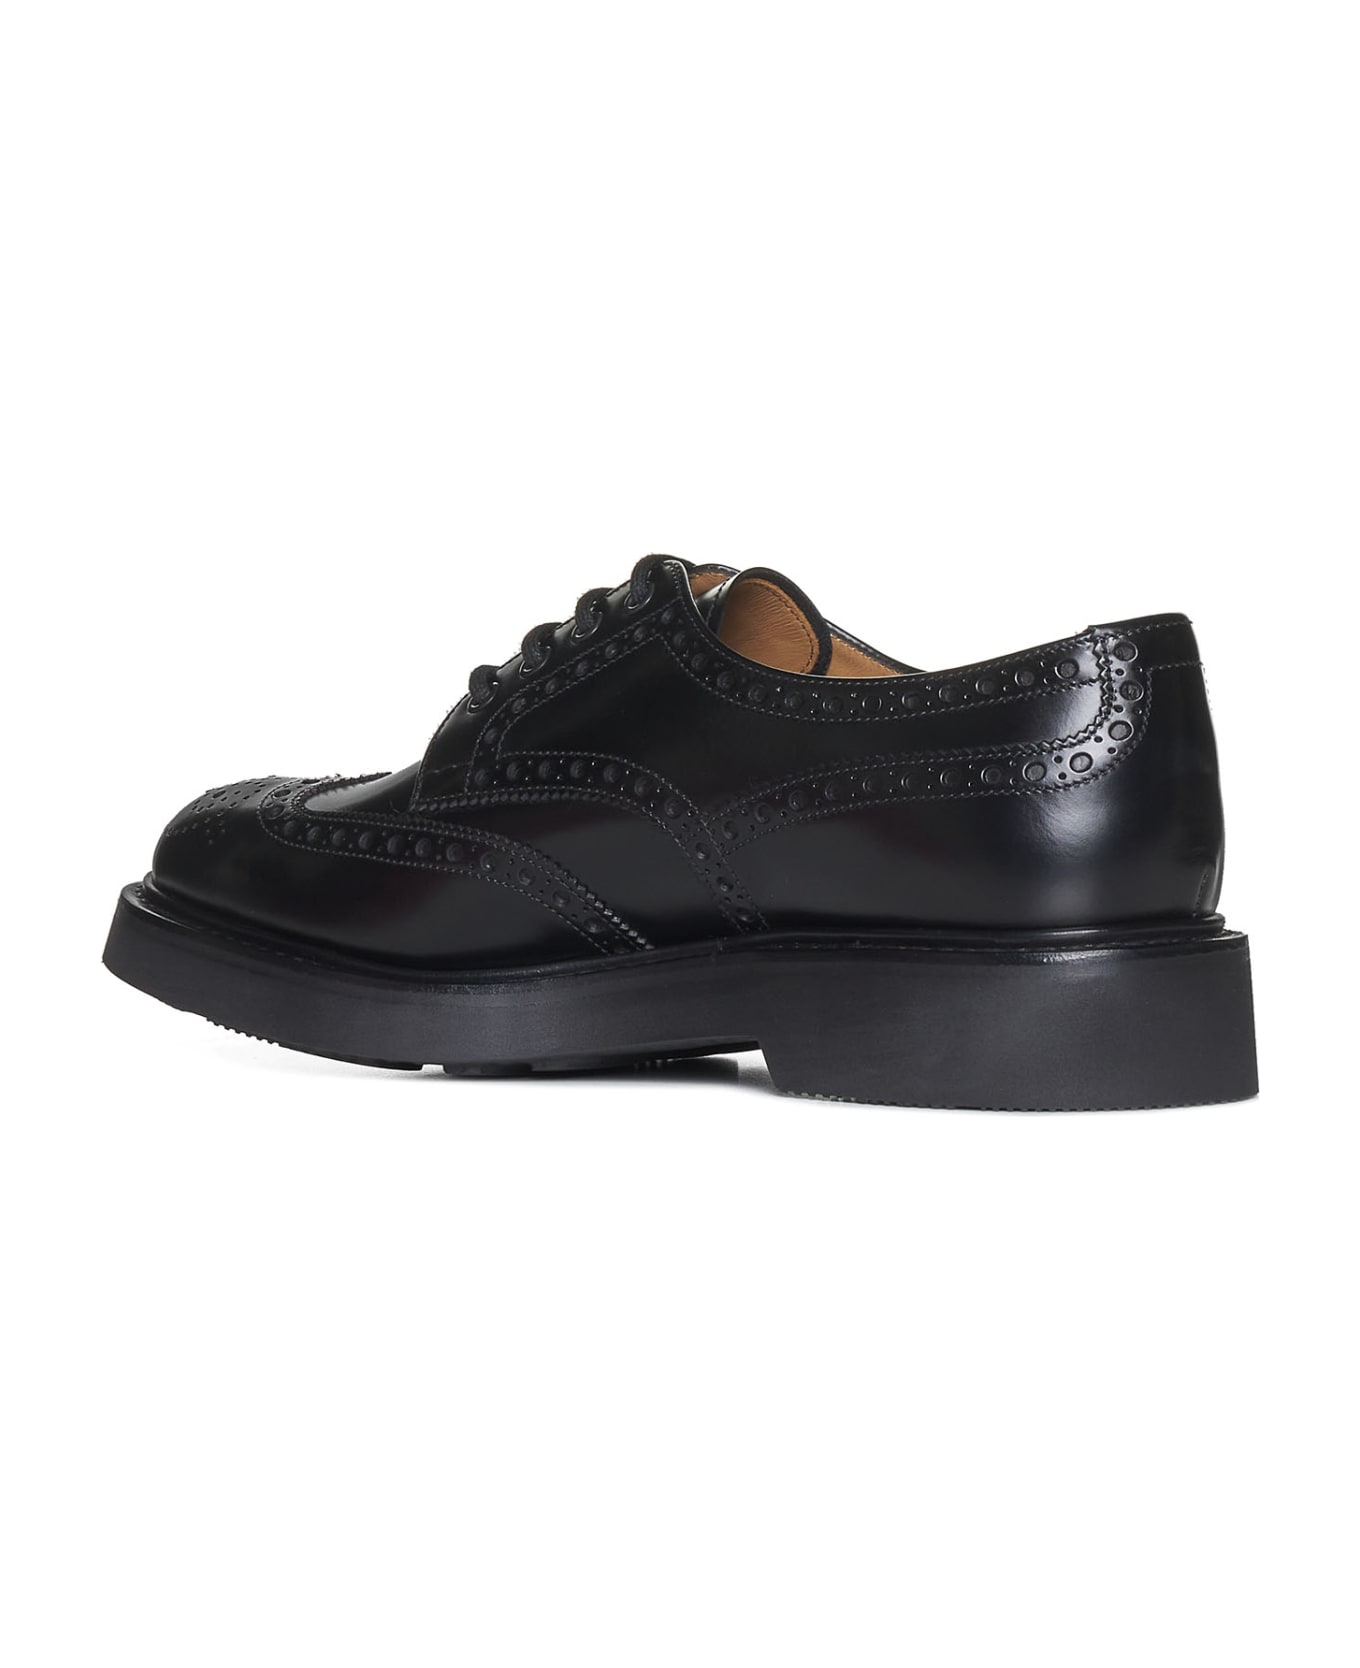 Church's Laced Shoes - Black